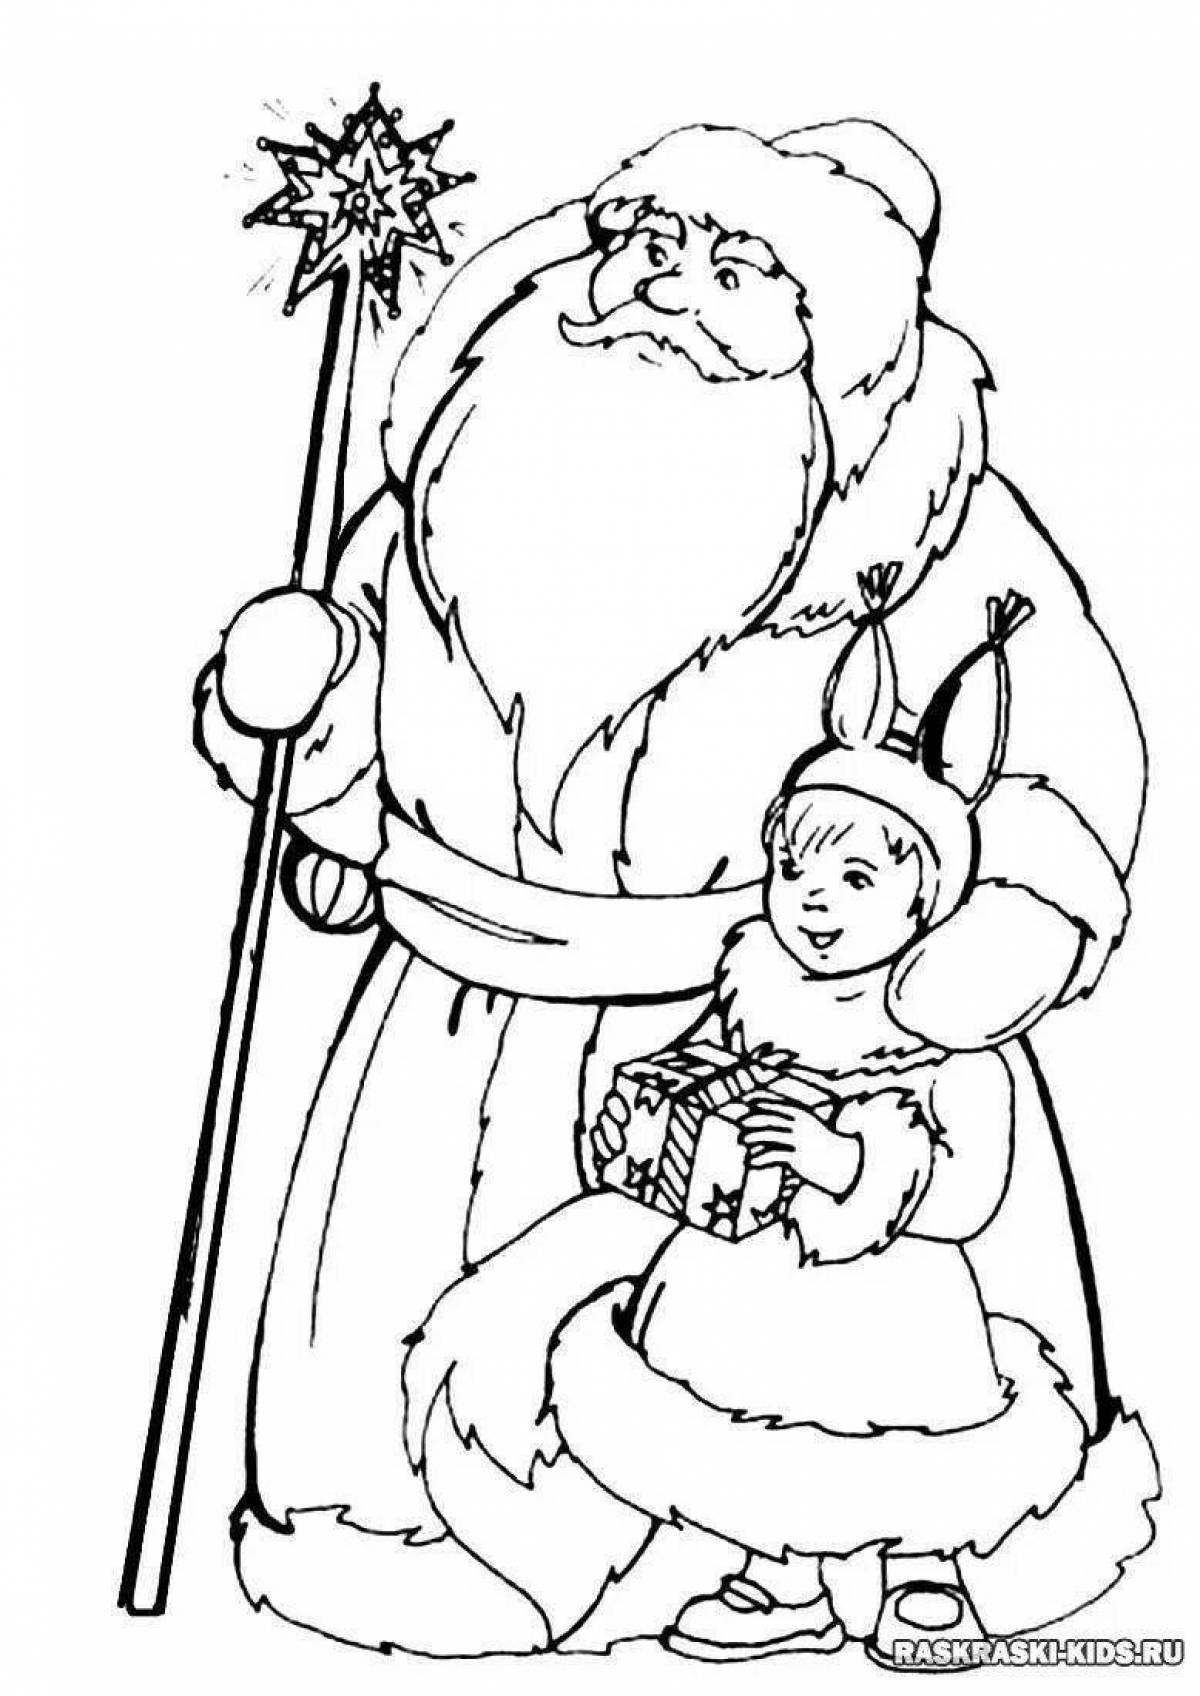 Exciting coloring of santa claus